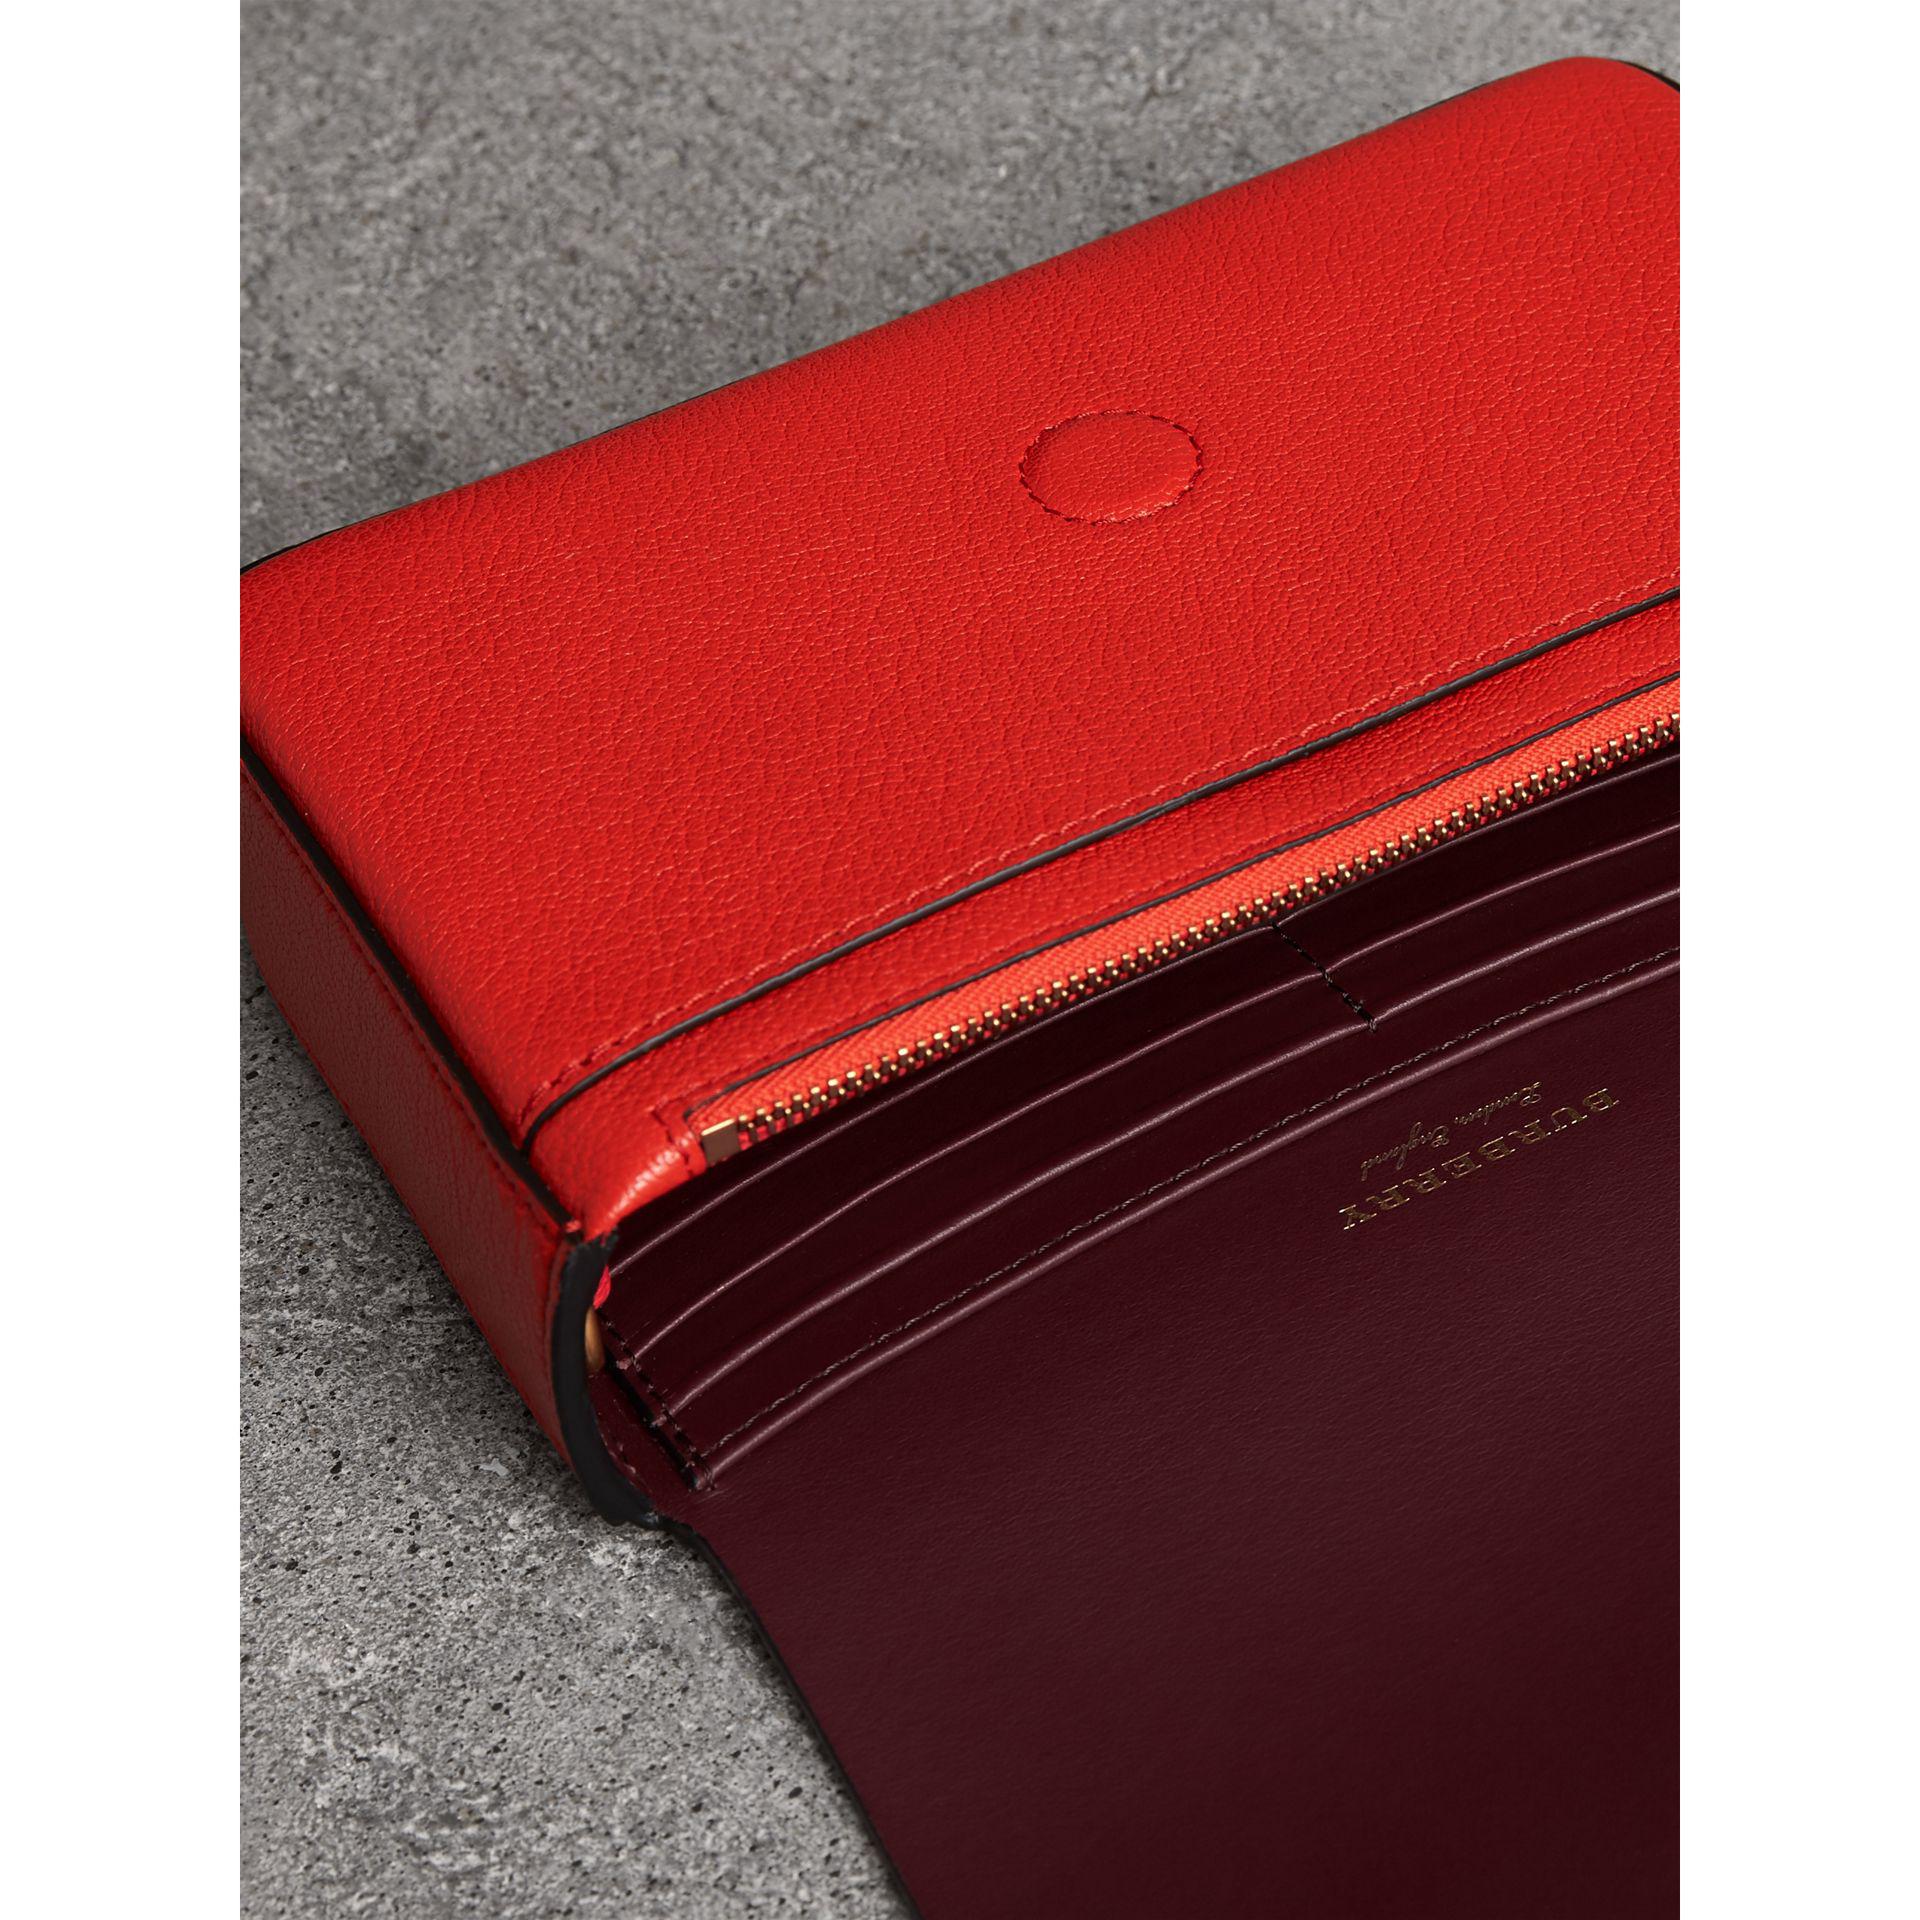 Burberry Equestrian Shield Leather Wallet With Detachable Strap in Bright  Red (Red) | Lyst Canada